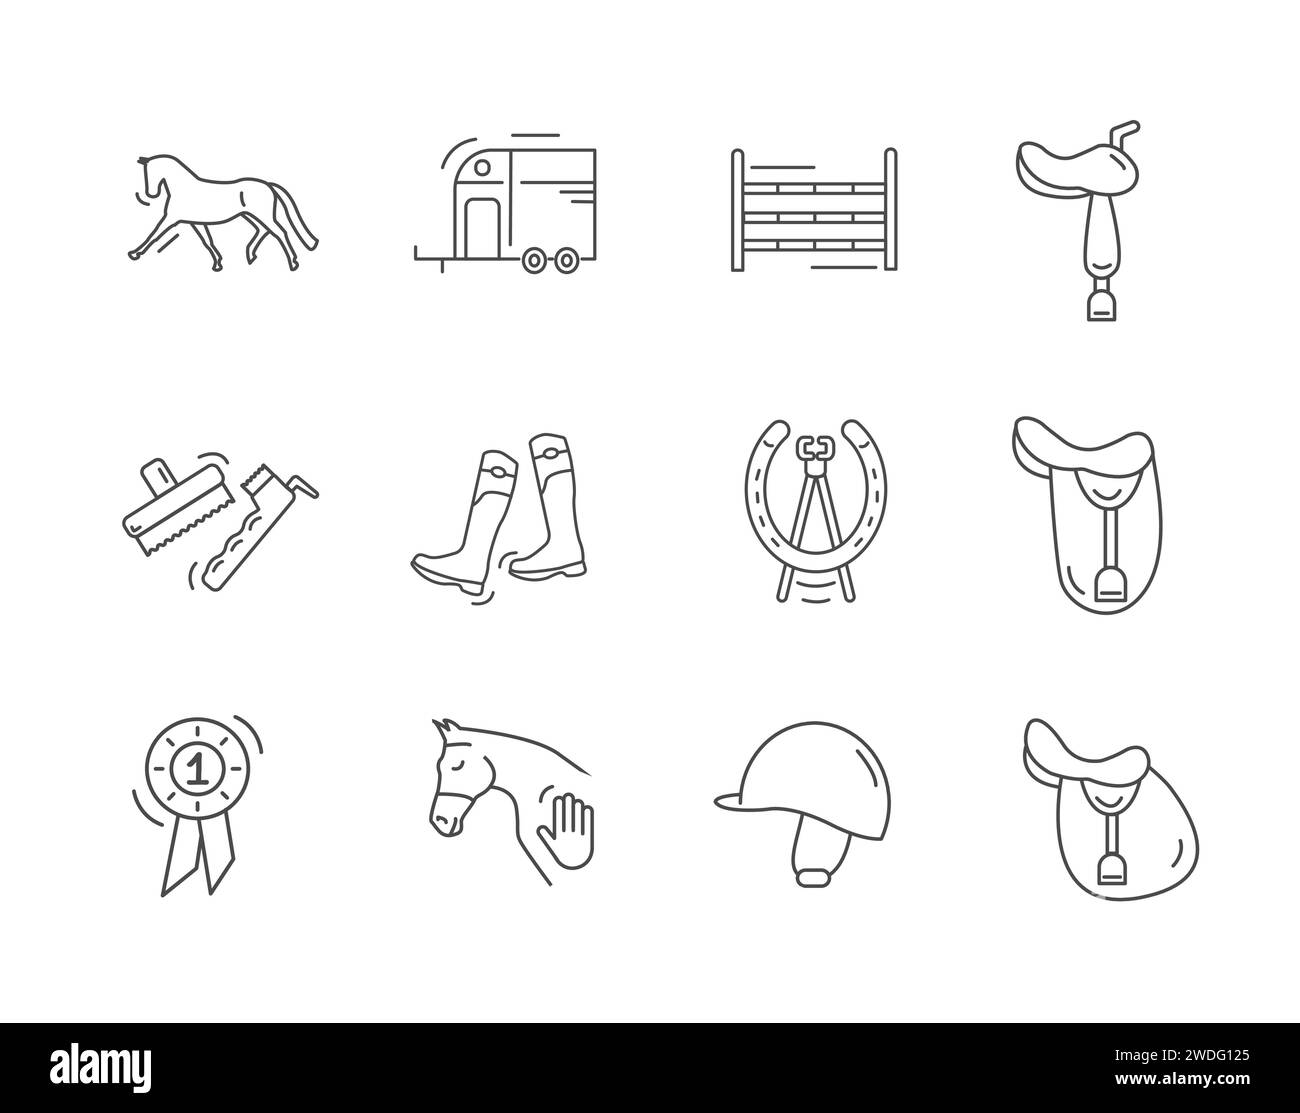 Equestrian icon lined art set. Collection of outlined horse riding icons. Vector illustration on white background Stock Vector